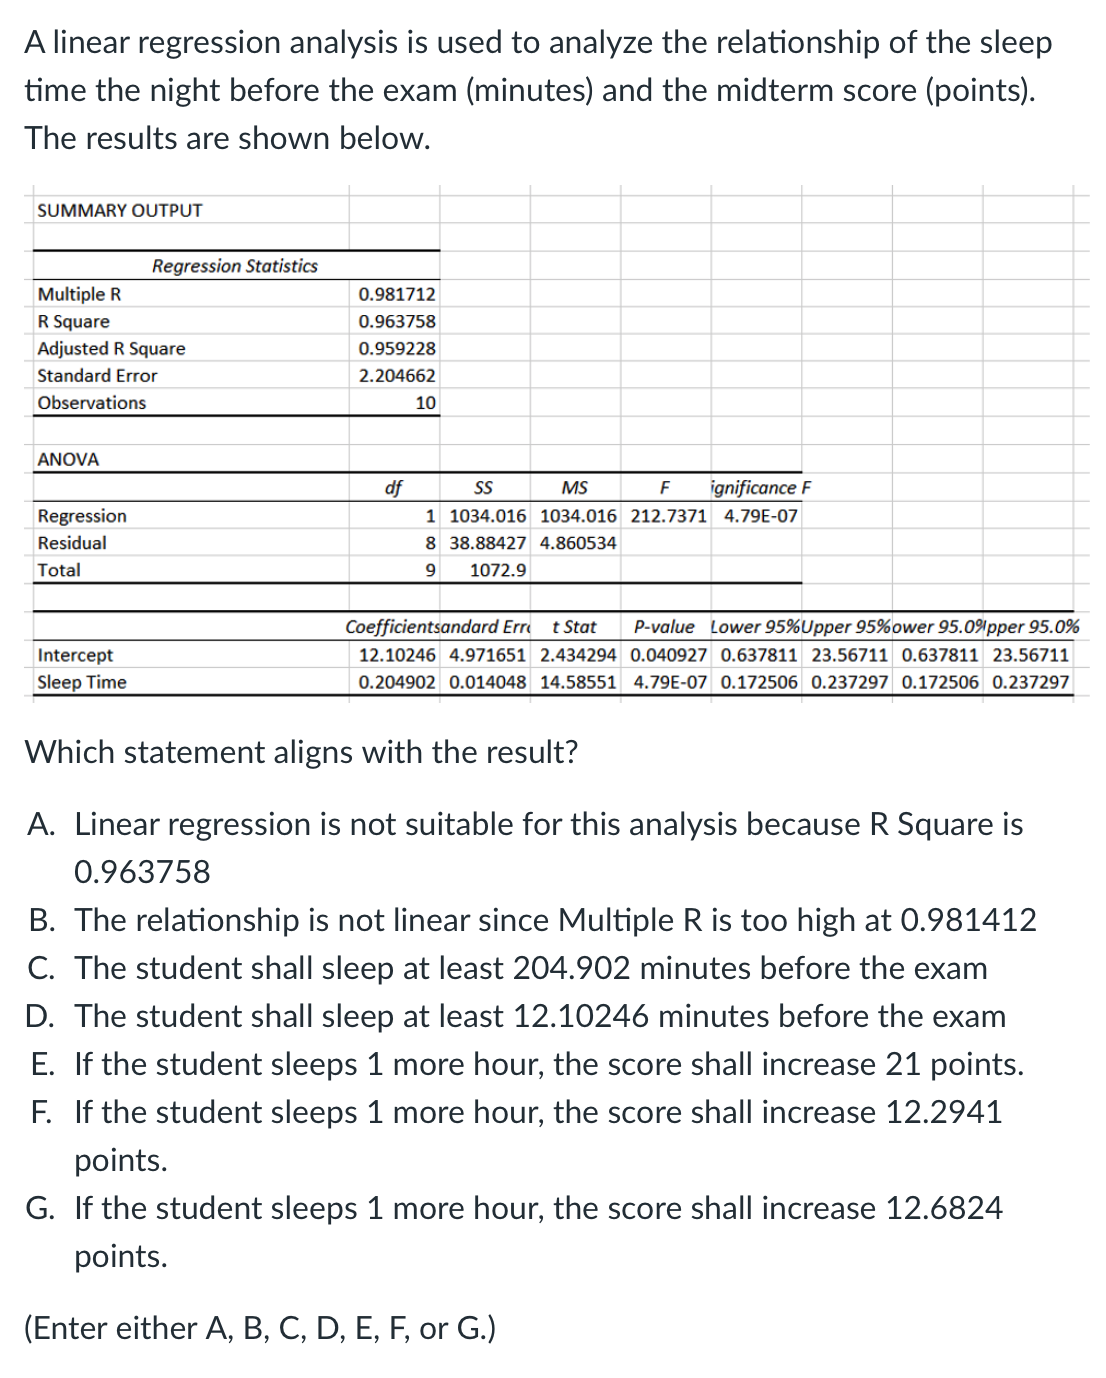 A linear regression analysis is used to analyze the relationship of the sleep
time the night before the exam (minutes) and the midterm score (points).
The results are shown below.
SUMMARY OUTPUT
Multiple R
R Square
Adjusted R Square
Standard Error
Observations
ANOVA
Regression Statistics
Regression
Residual
Total
0.981712
0.963758
0.959228
2.204662
df
10
SS
MS
F ignificance F
1 1034.016 1034.016 212.7371 4.79E-07
8 38.88427 4.860534
9
1072.9
Coefficientsandard Err t Stat P-value Lower 95%Upper 95%ower 95.0%pper 95.0%
12.10246 4.971651 2.434294 0.040927 0.637811 23.56711 0.637811 23.56711
0.204902 0.014048 14.58551 4.79E-07 0.172506 0.237297 0.172506 0.237297
Intercept
Sleep Time
Which statement aligns with the result?
A. Linear regression is not suitable for this analysis because R Square is
0.963758
B. The relationship is not linear since Multiple R is too high at 0.981412
C. The student shall sleep at least 204.902 minutes before the exam
D. The student shall sleep at least 12.10246 minutes before the exam
E. If the student sleeps 1 more hour, the score shall increase 21 points.
F. If the student sleeps 1 more hour, the score shall increase 12.2941
points.
G. If the student sleeps 1 more hour, the score shall increase 12.6824
points.
(Enter either A, B, C, D, E, F, or G.)